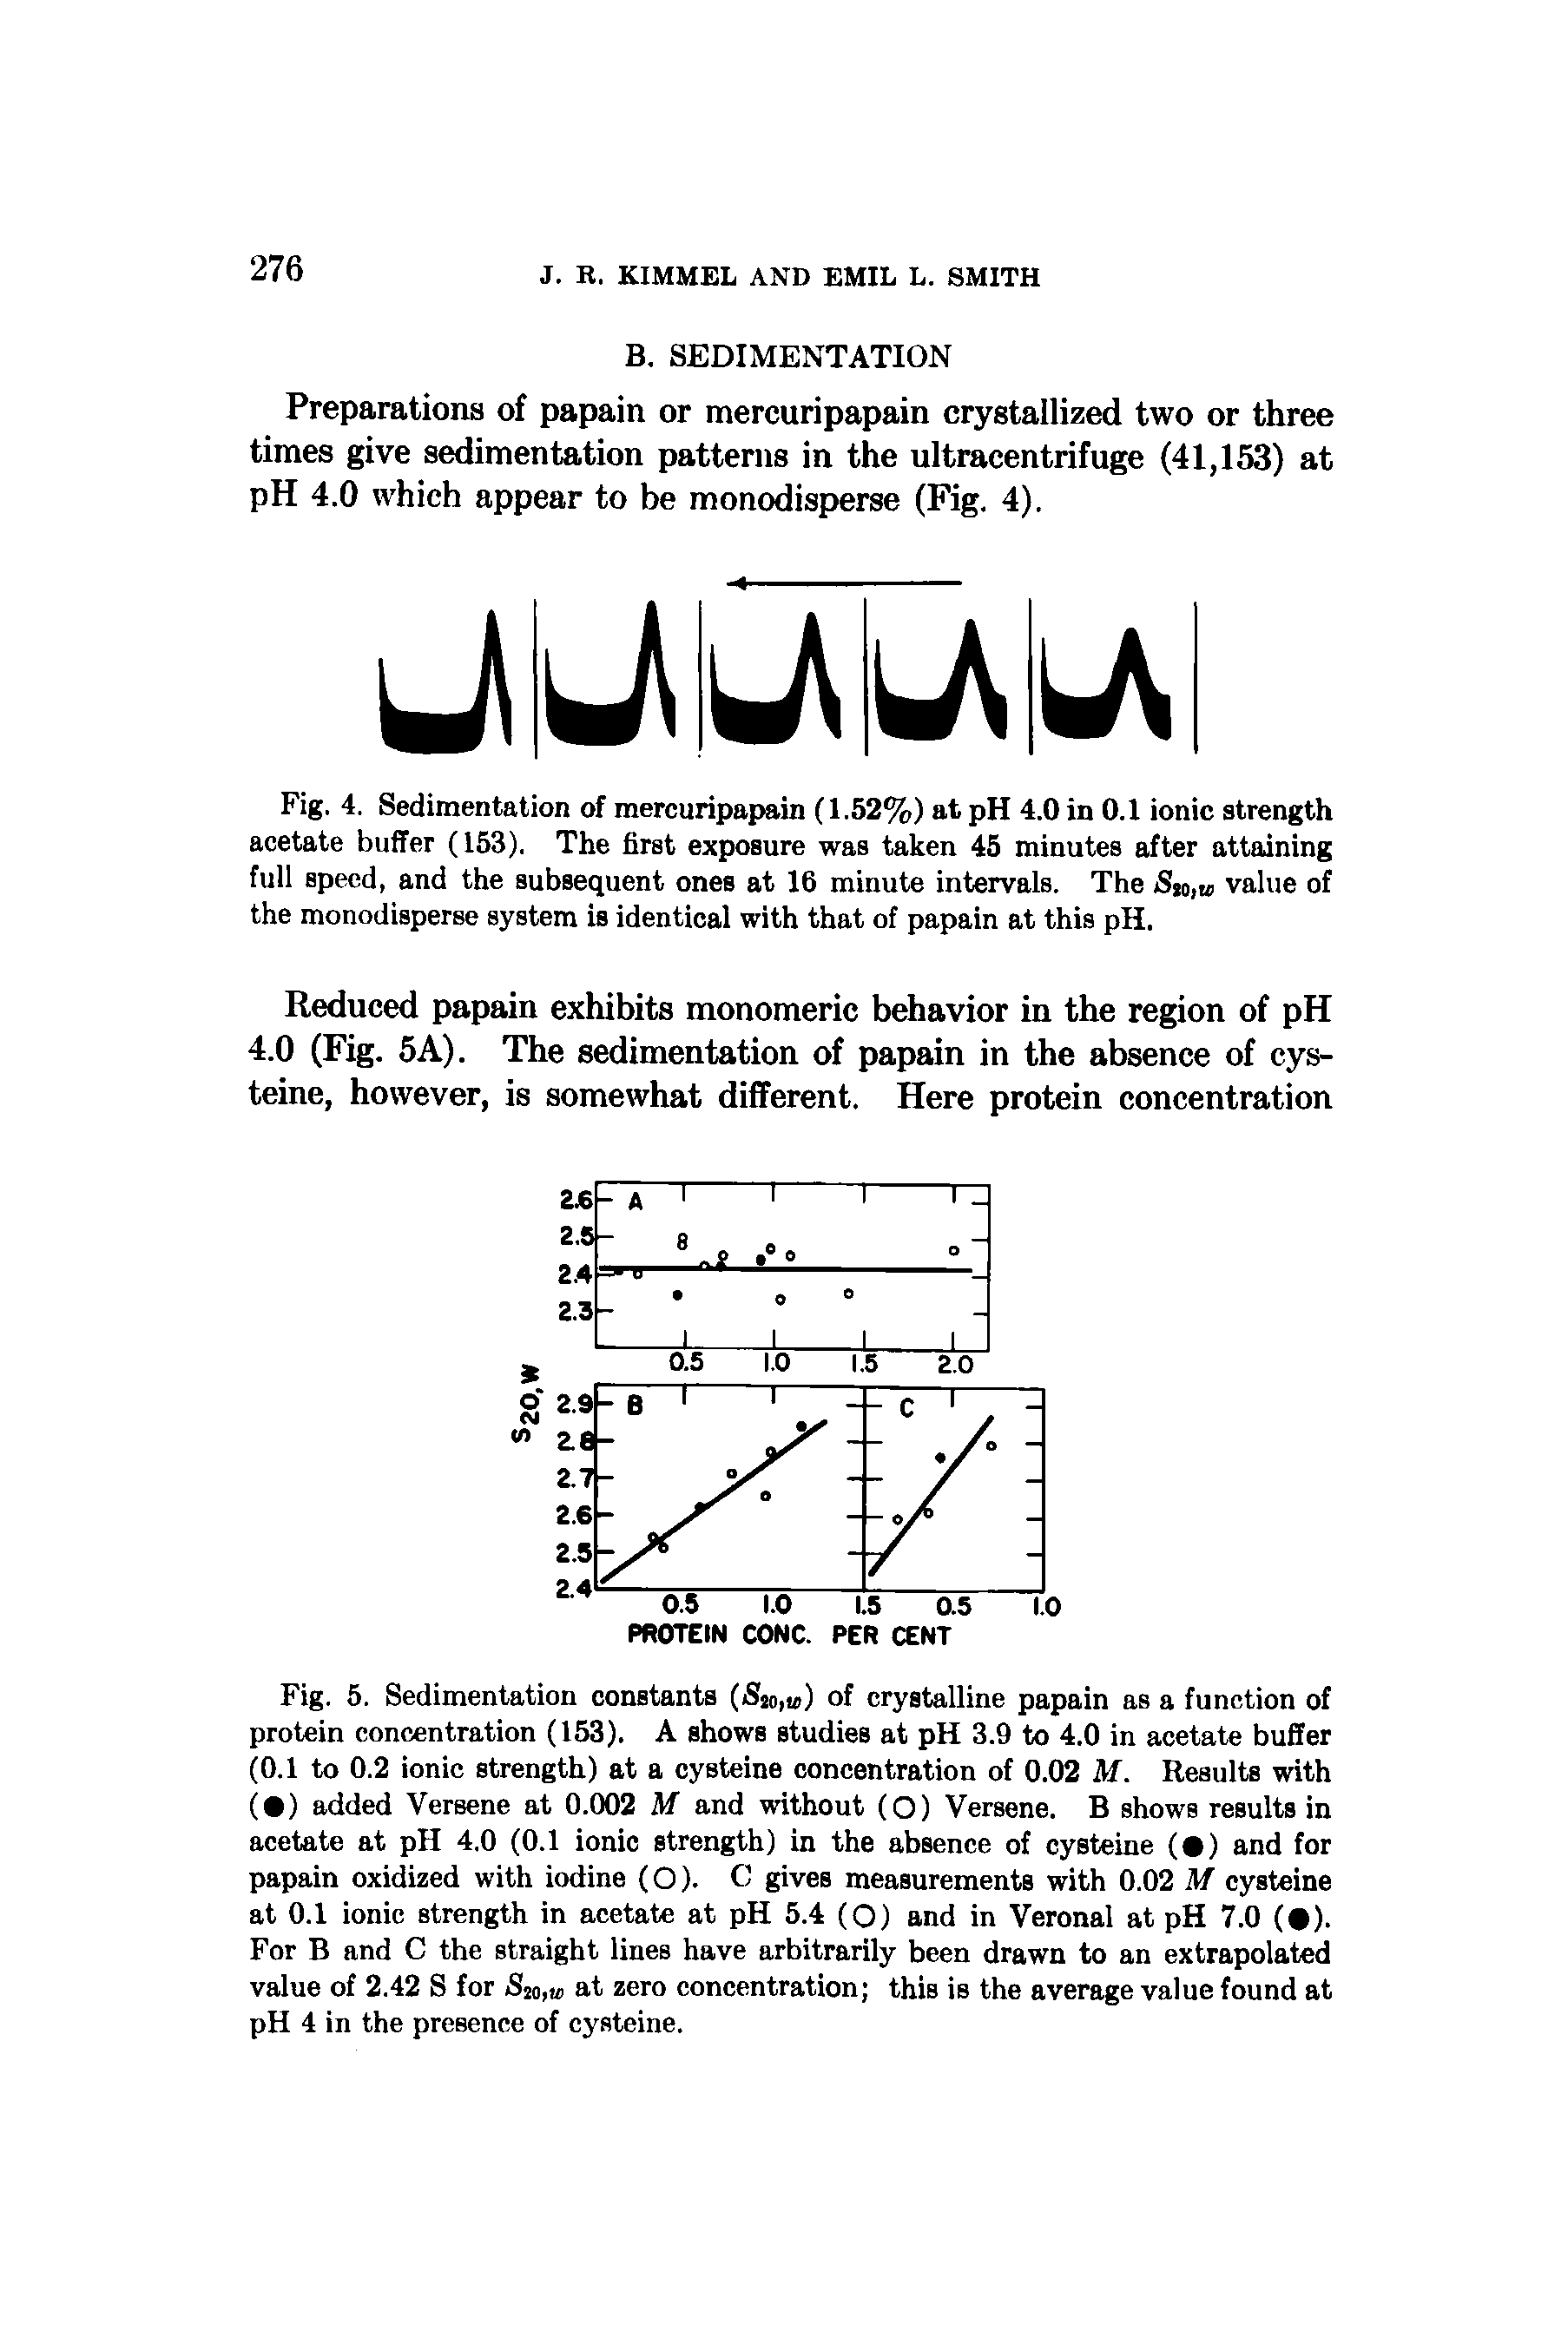 Fig. 5. Sedimentation constants (iSjo, ) of crystalline papain as a function of protein concentration (153). A shows studies at pH 3.9 to 4.0 in acetate buffer (0.1 to 0.2 ionic strength) at a cysteine concentration of 0.02 M. Results with ( ) added Versene at 0.002 M and without (O) Versene. B shows results in acetate at pH 4.0 (0.1 ionic strength) in the absence of cysteine ( ) and for papain oxidized with iodine (O). C gives measurements with 0.02 M cysteine at 0.1 ionic strength in acetate at pH 5.4 (O) and in Veronal at pH 7.0 ( ). For B and C the straight lines have arbitrarily been drawn to an extrapolated value of 2.42 S for Sia,u at zero concentration this is the average value found at pH 4 in the presence of cysteine.